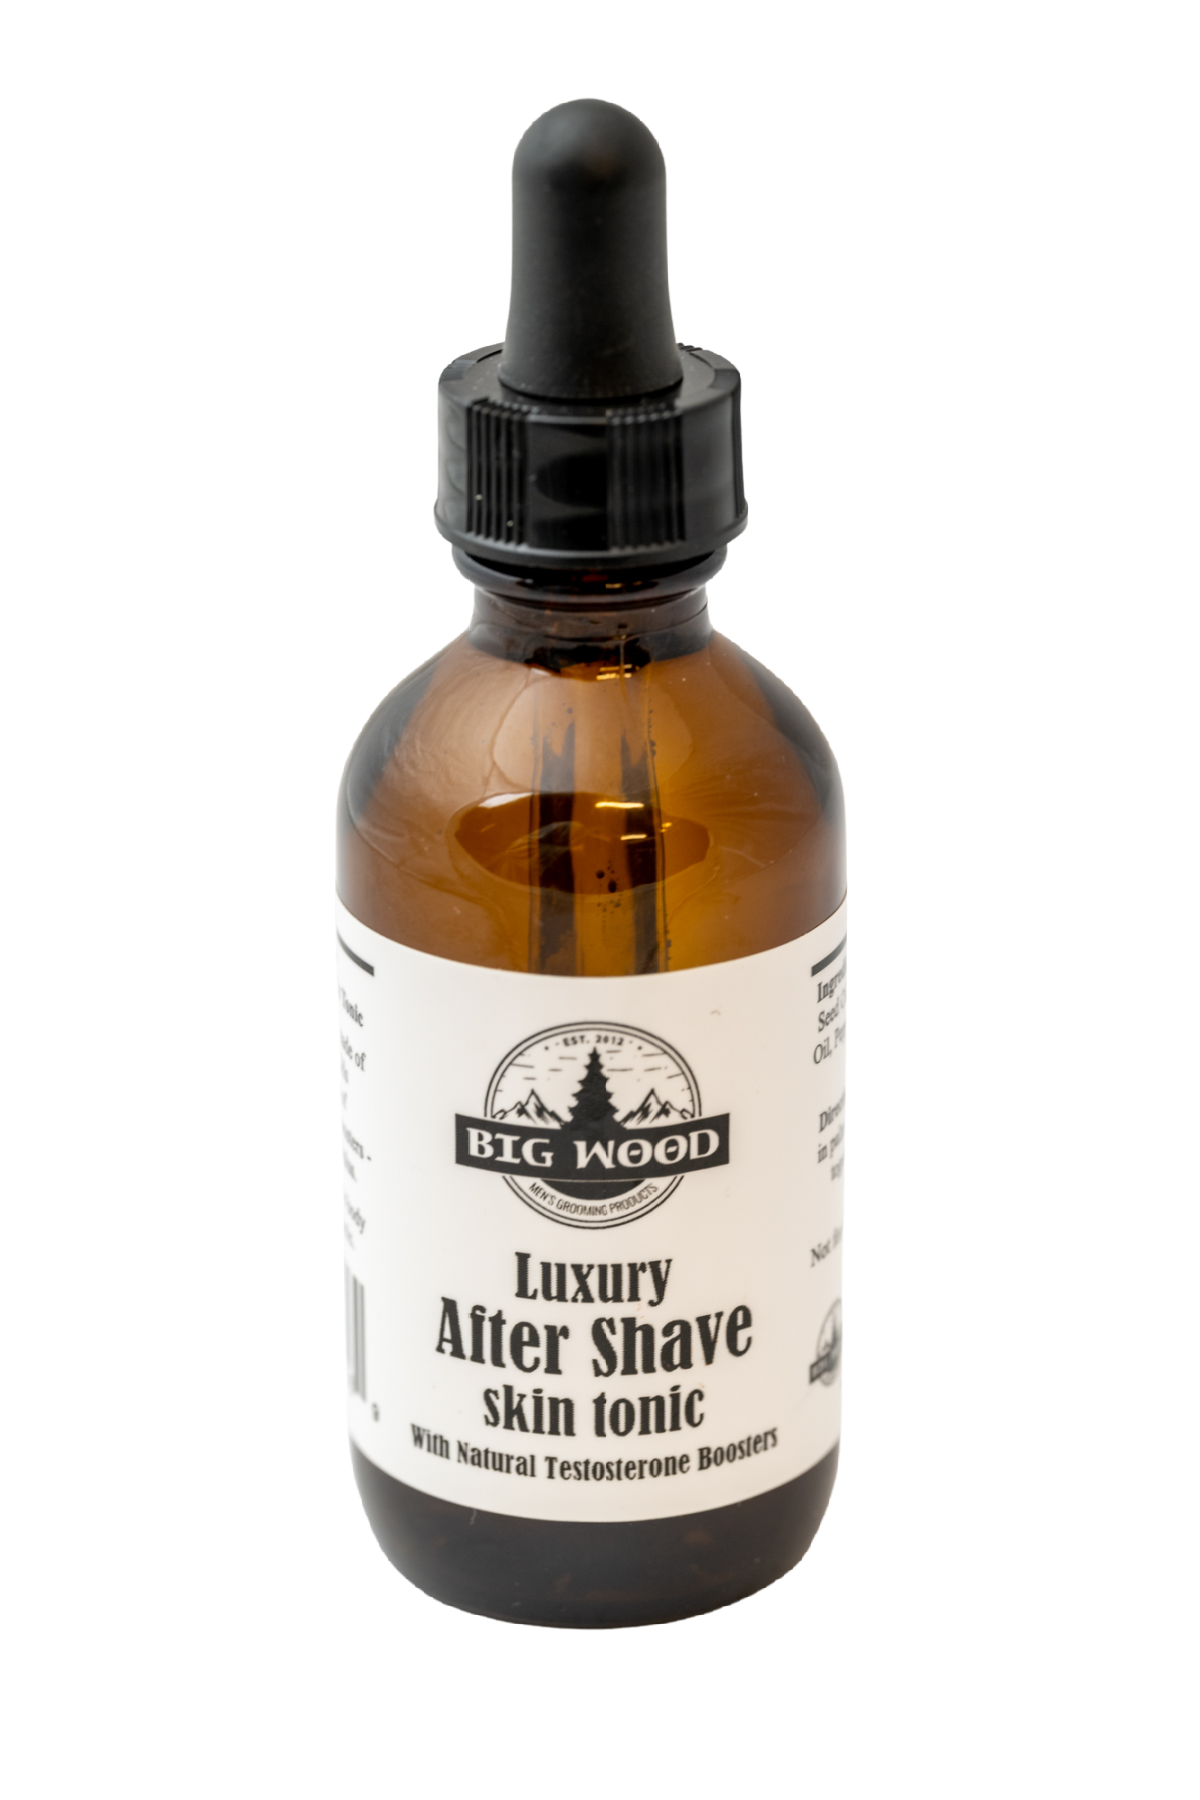 Luxury After Shave Skin Tonic